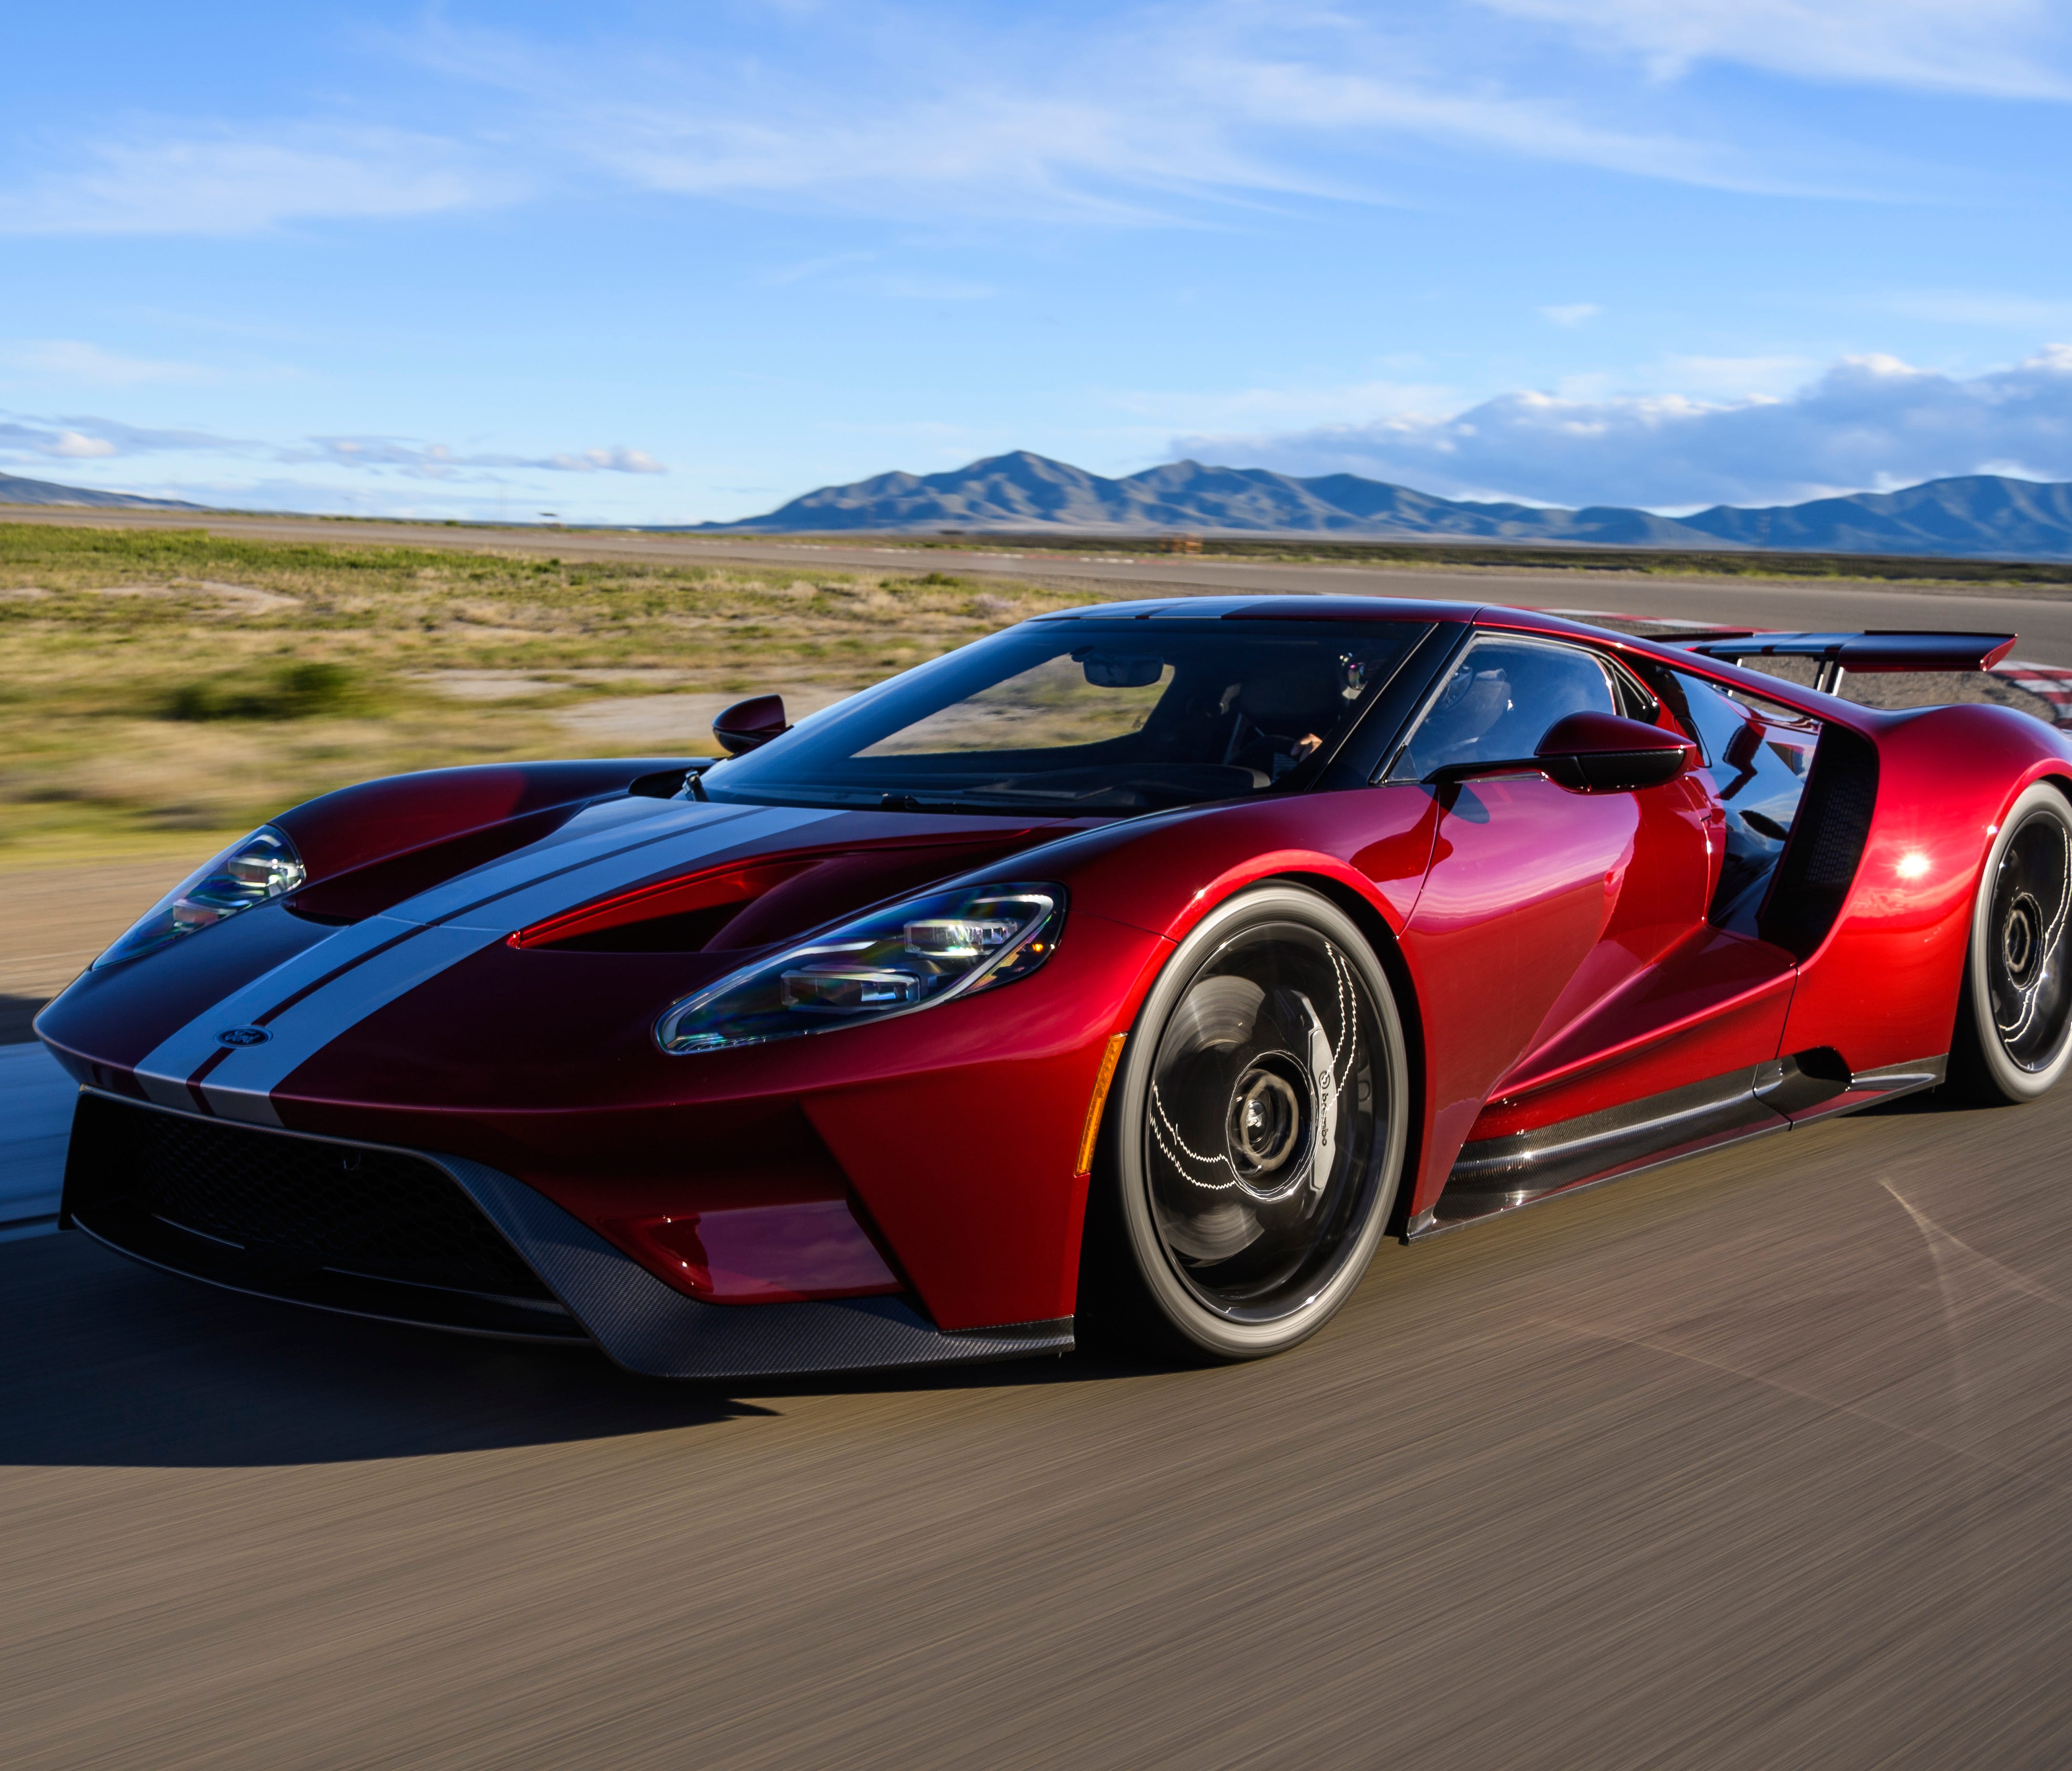 Ford has piled all of its technology into the GT, the most expensive Ford ever